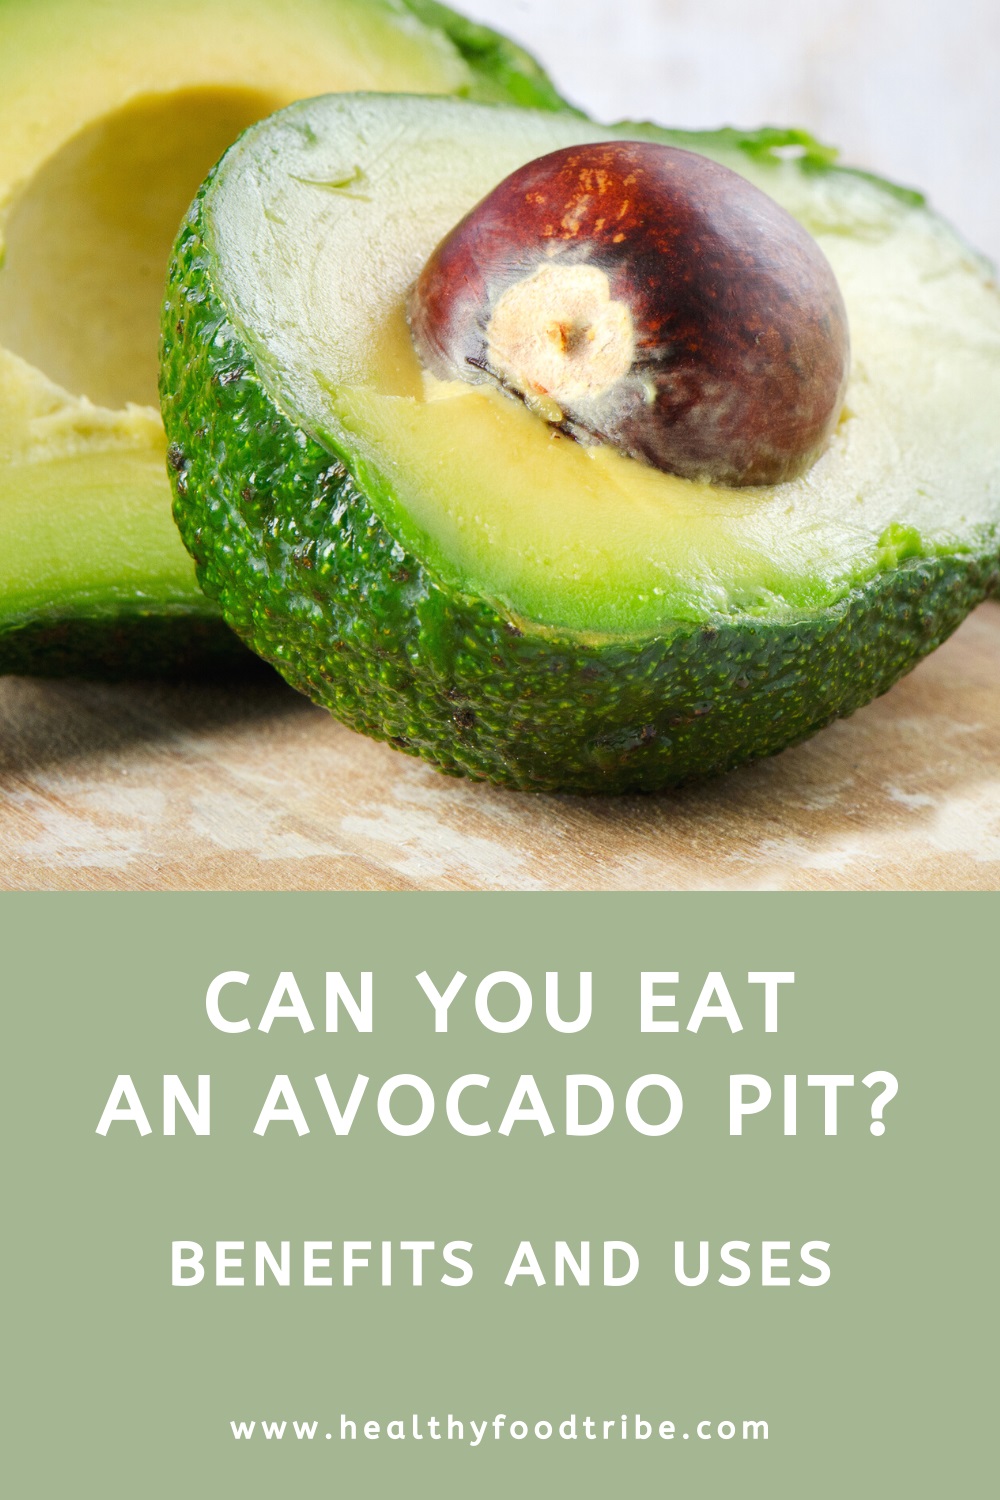 Can you eat an avocado pit? Benefits and uses